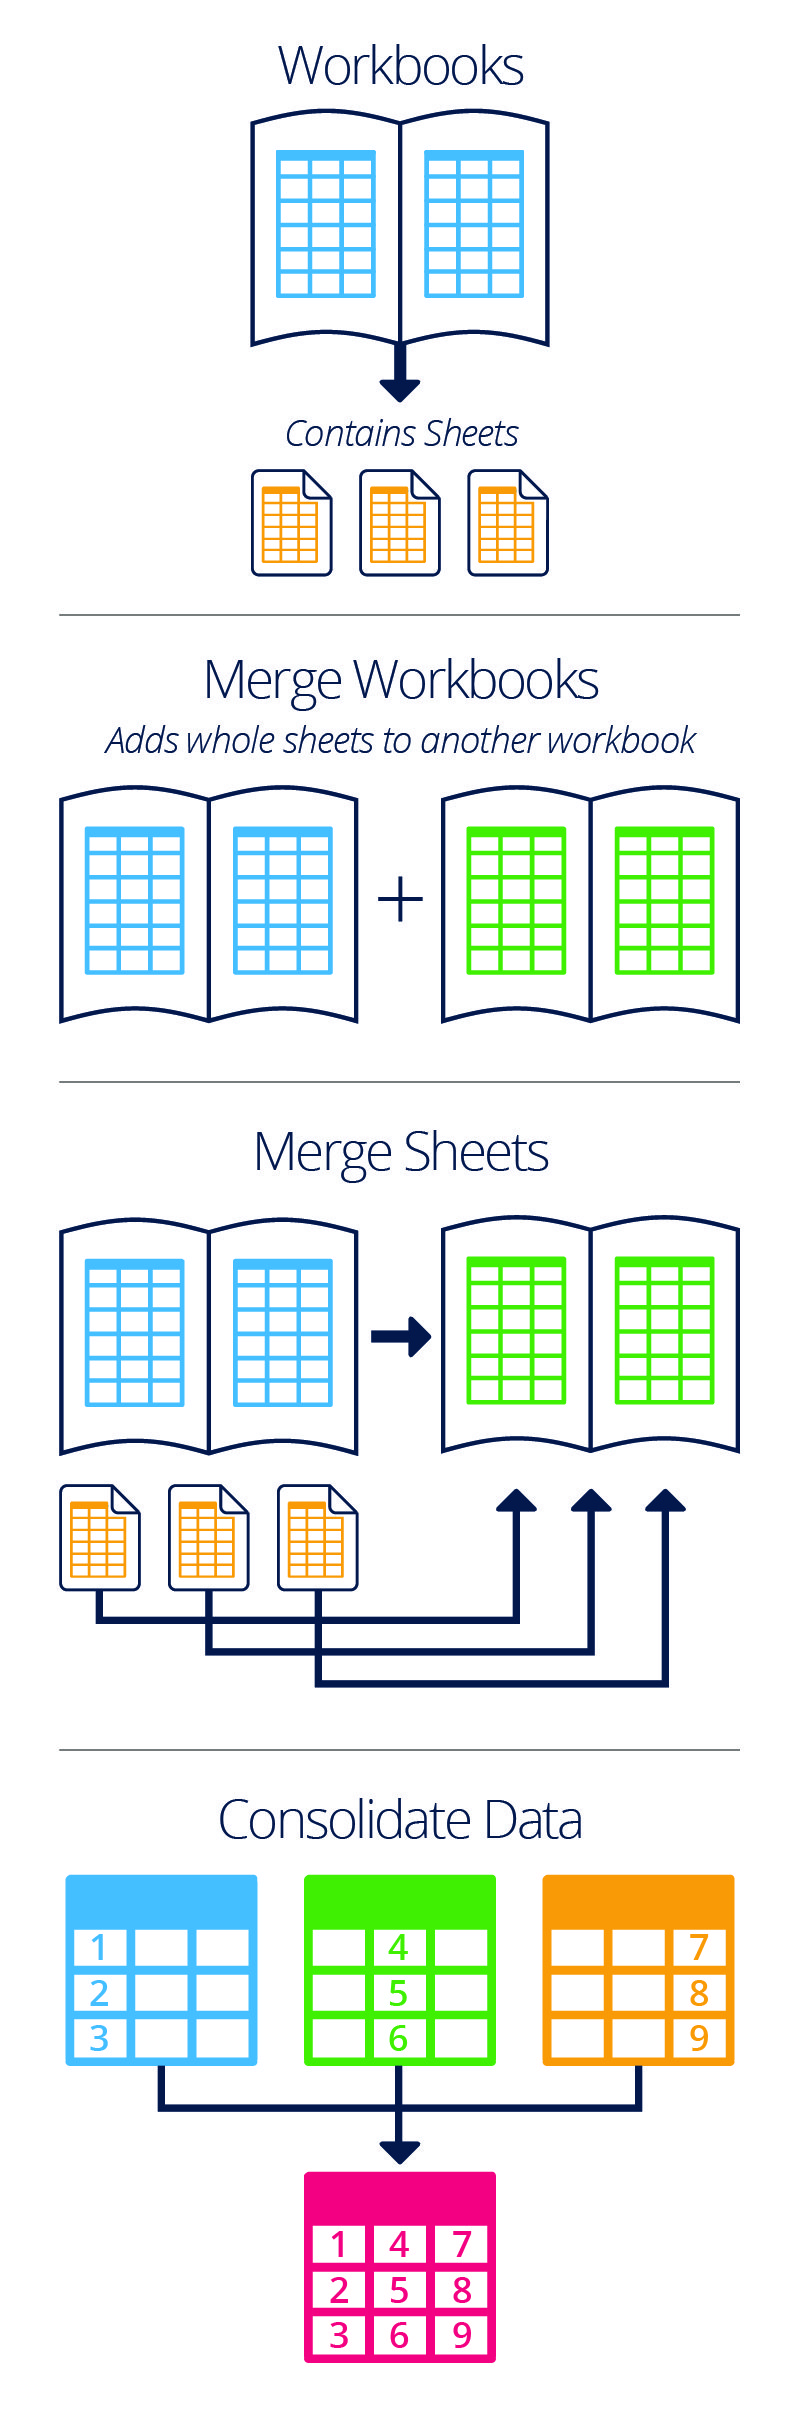 How To Merge Combine Multiple Excel Files Into One Workbook 7007